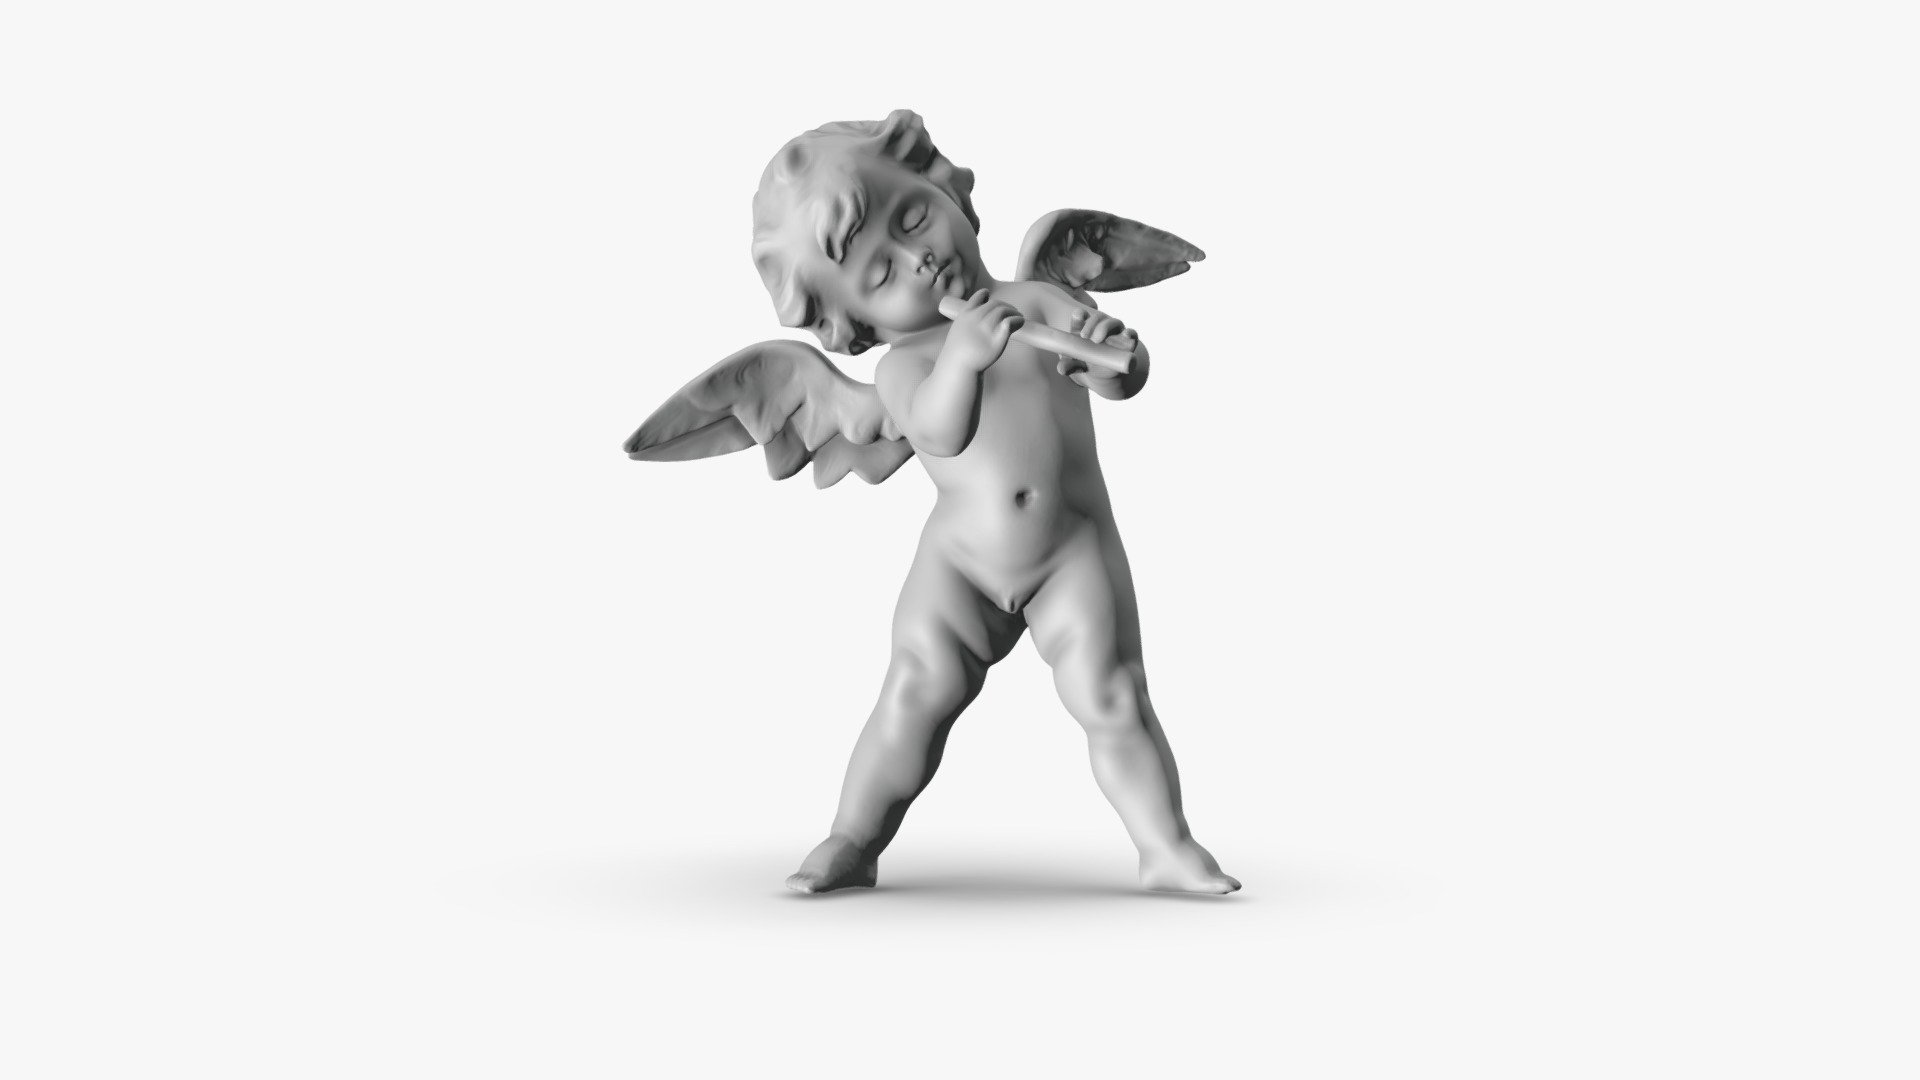 This model depicts an angel who plays the flute and stands in a pose with his legs spread wide apart. The angel is depicted with wings. The angel has soft and flowing facial and body features. The model can be used as a decorative piece for the home or as a gift for music and art lovers 3d model